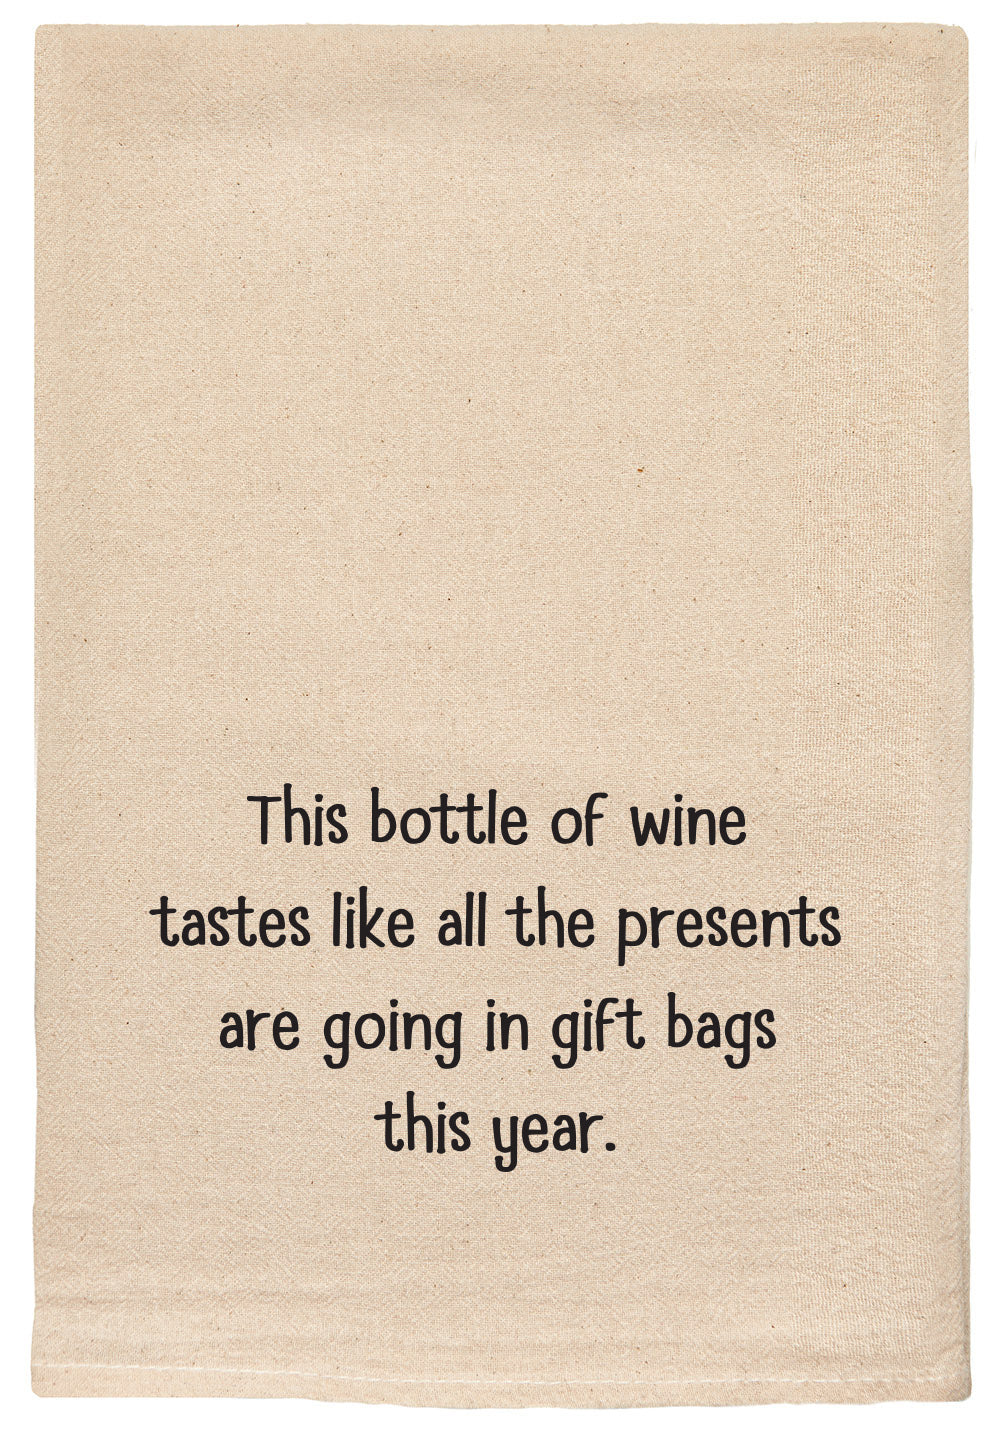 This bottle of wine tastes like all the presents are going in gift bags this year